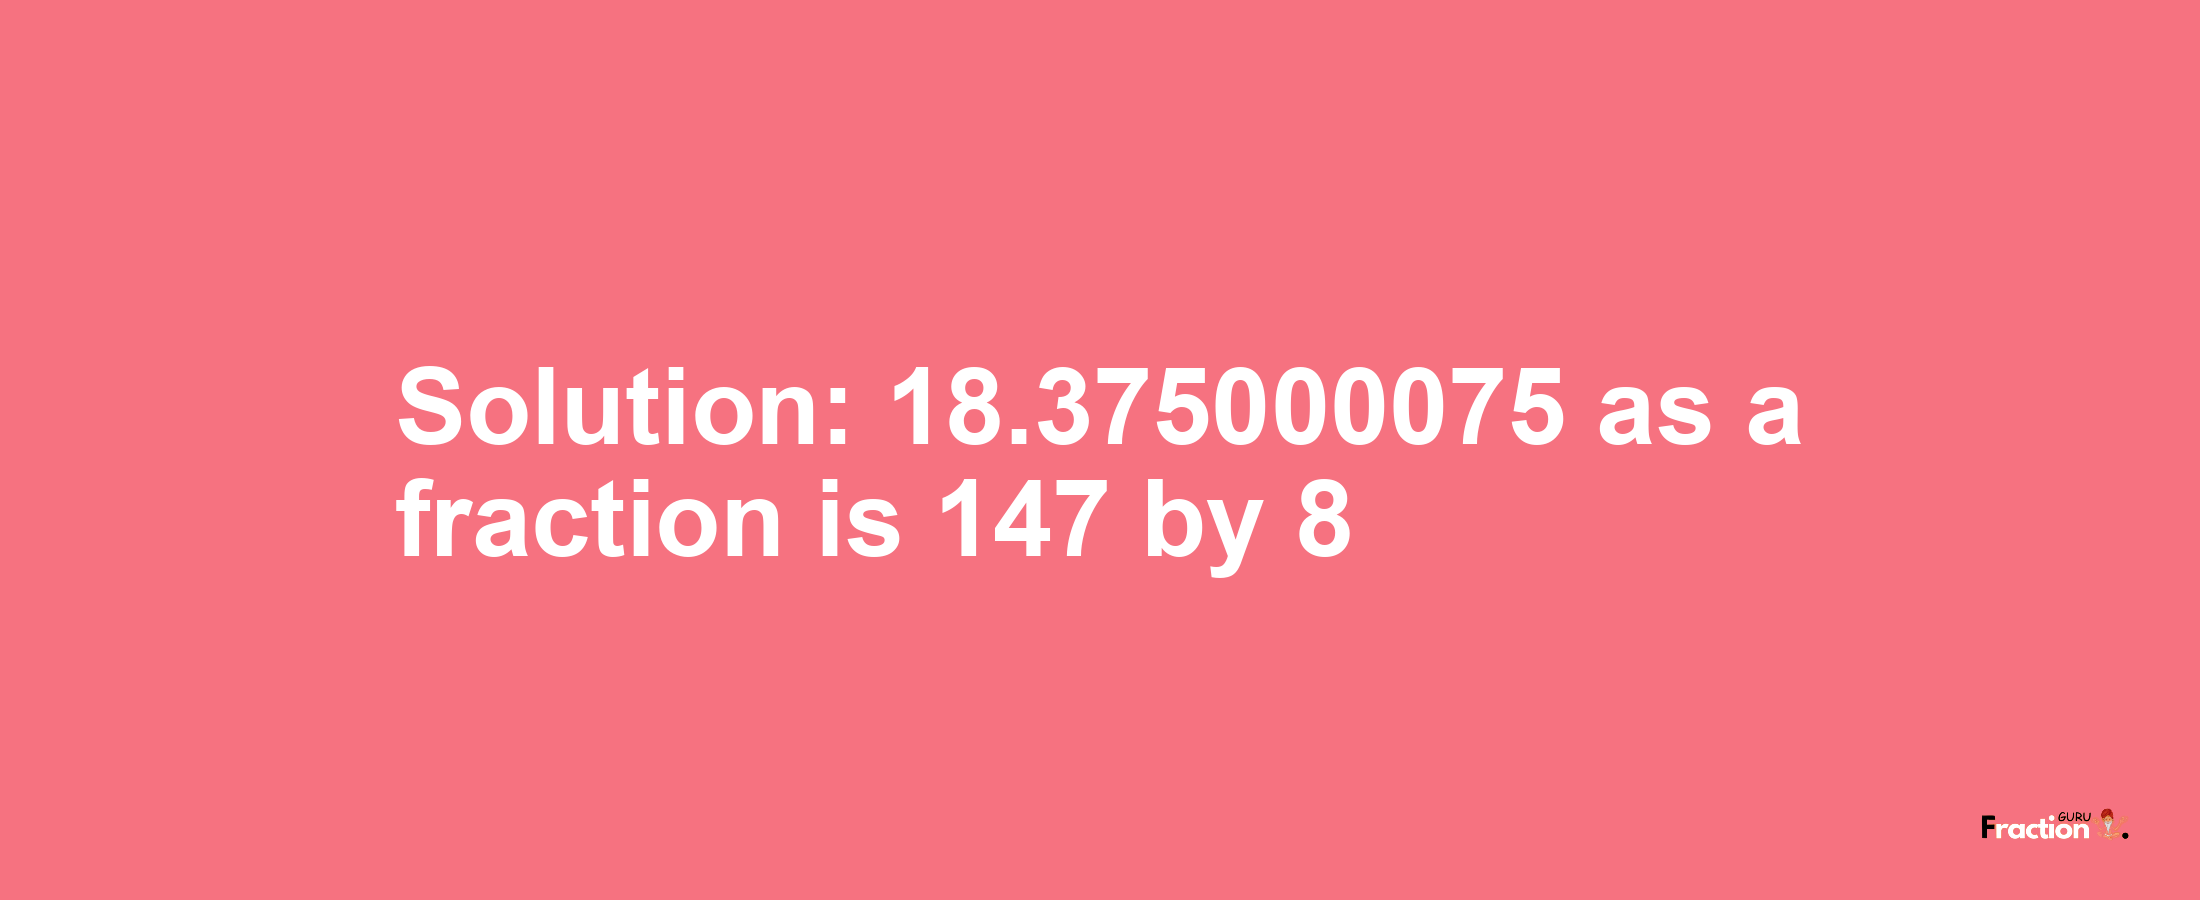 Solution:18.375000075 as a fraction is 147/8